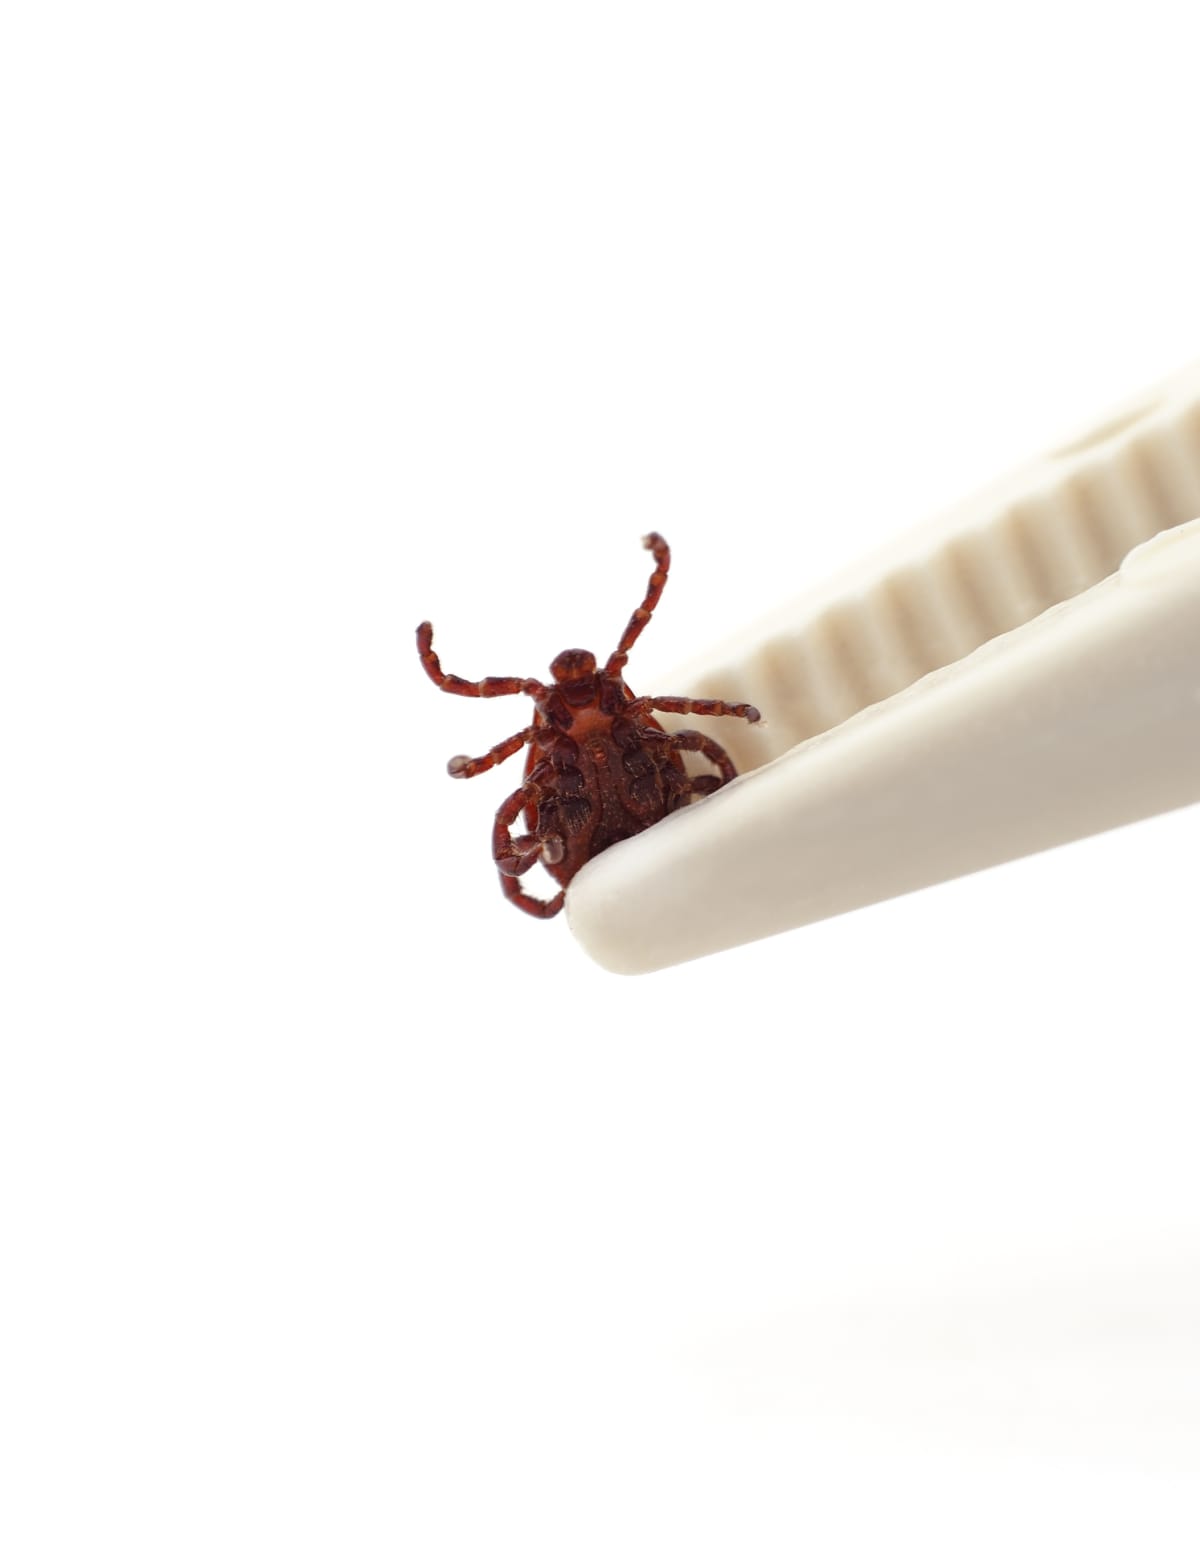 One tick is clamped with tweezers isolated on a white background.